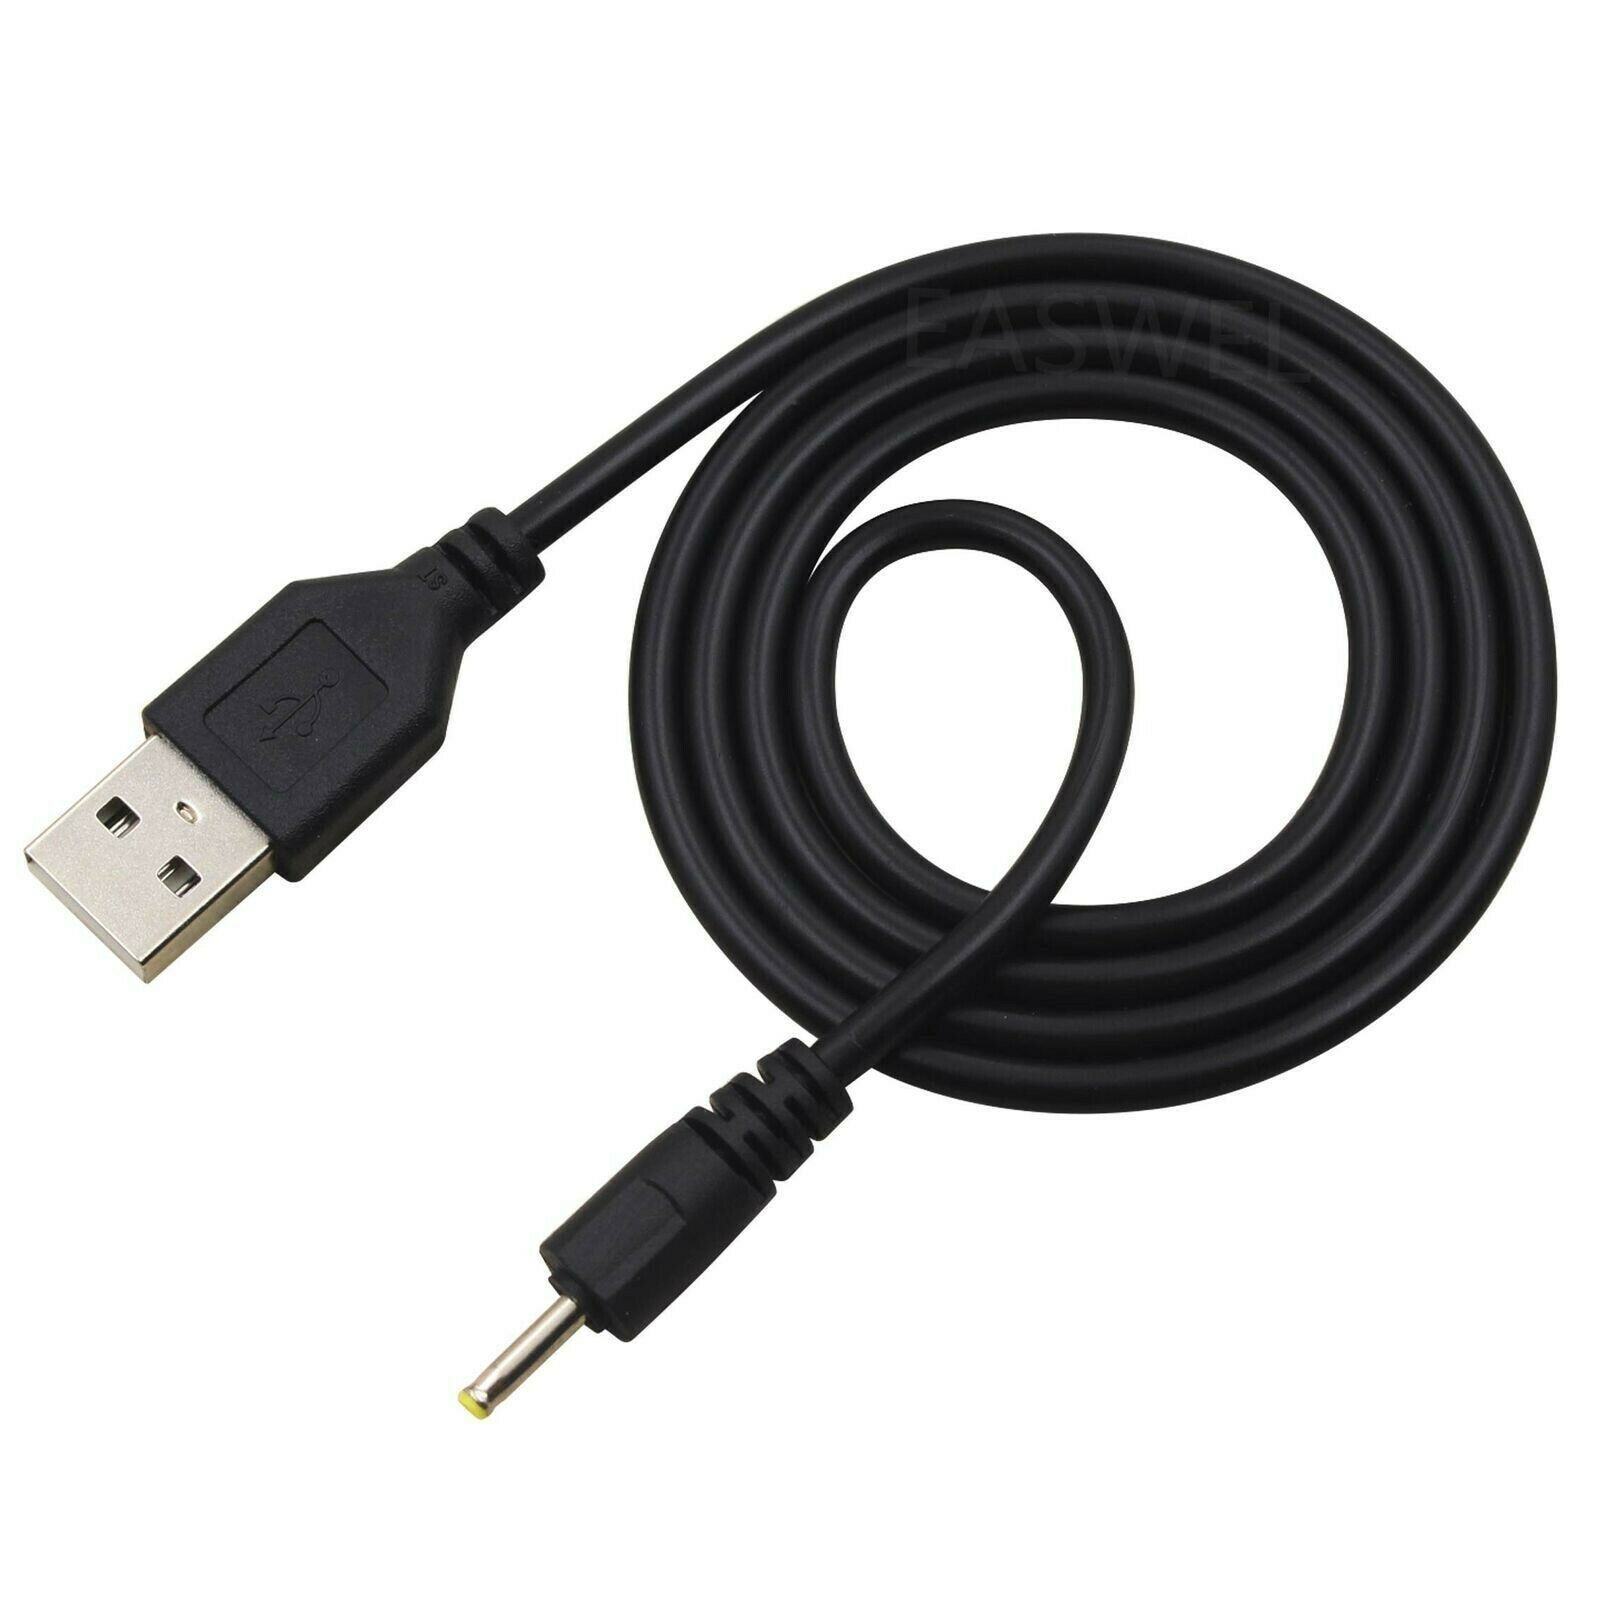 USB DC Charger Cable Cord for Mini S530 Smallest Invisible Wireless Power Input Voltage: AC 100-240V, 50/60Hz Color: Bl